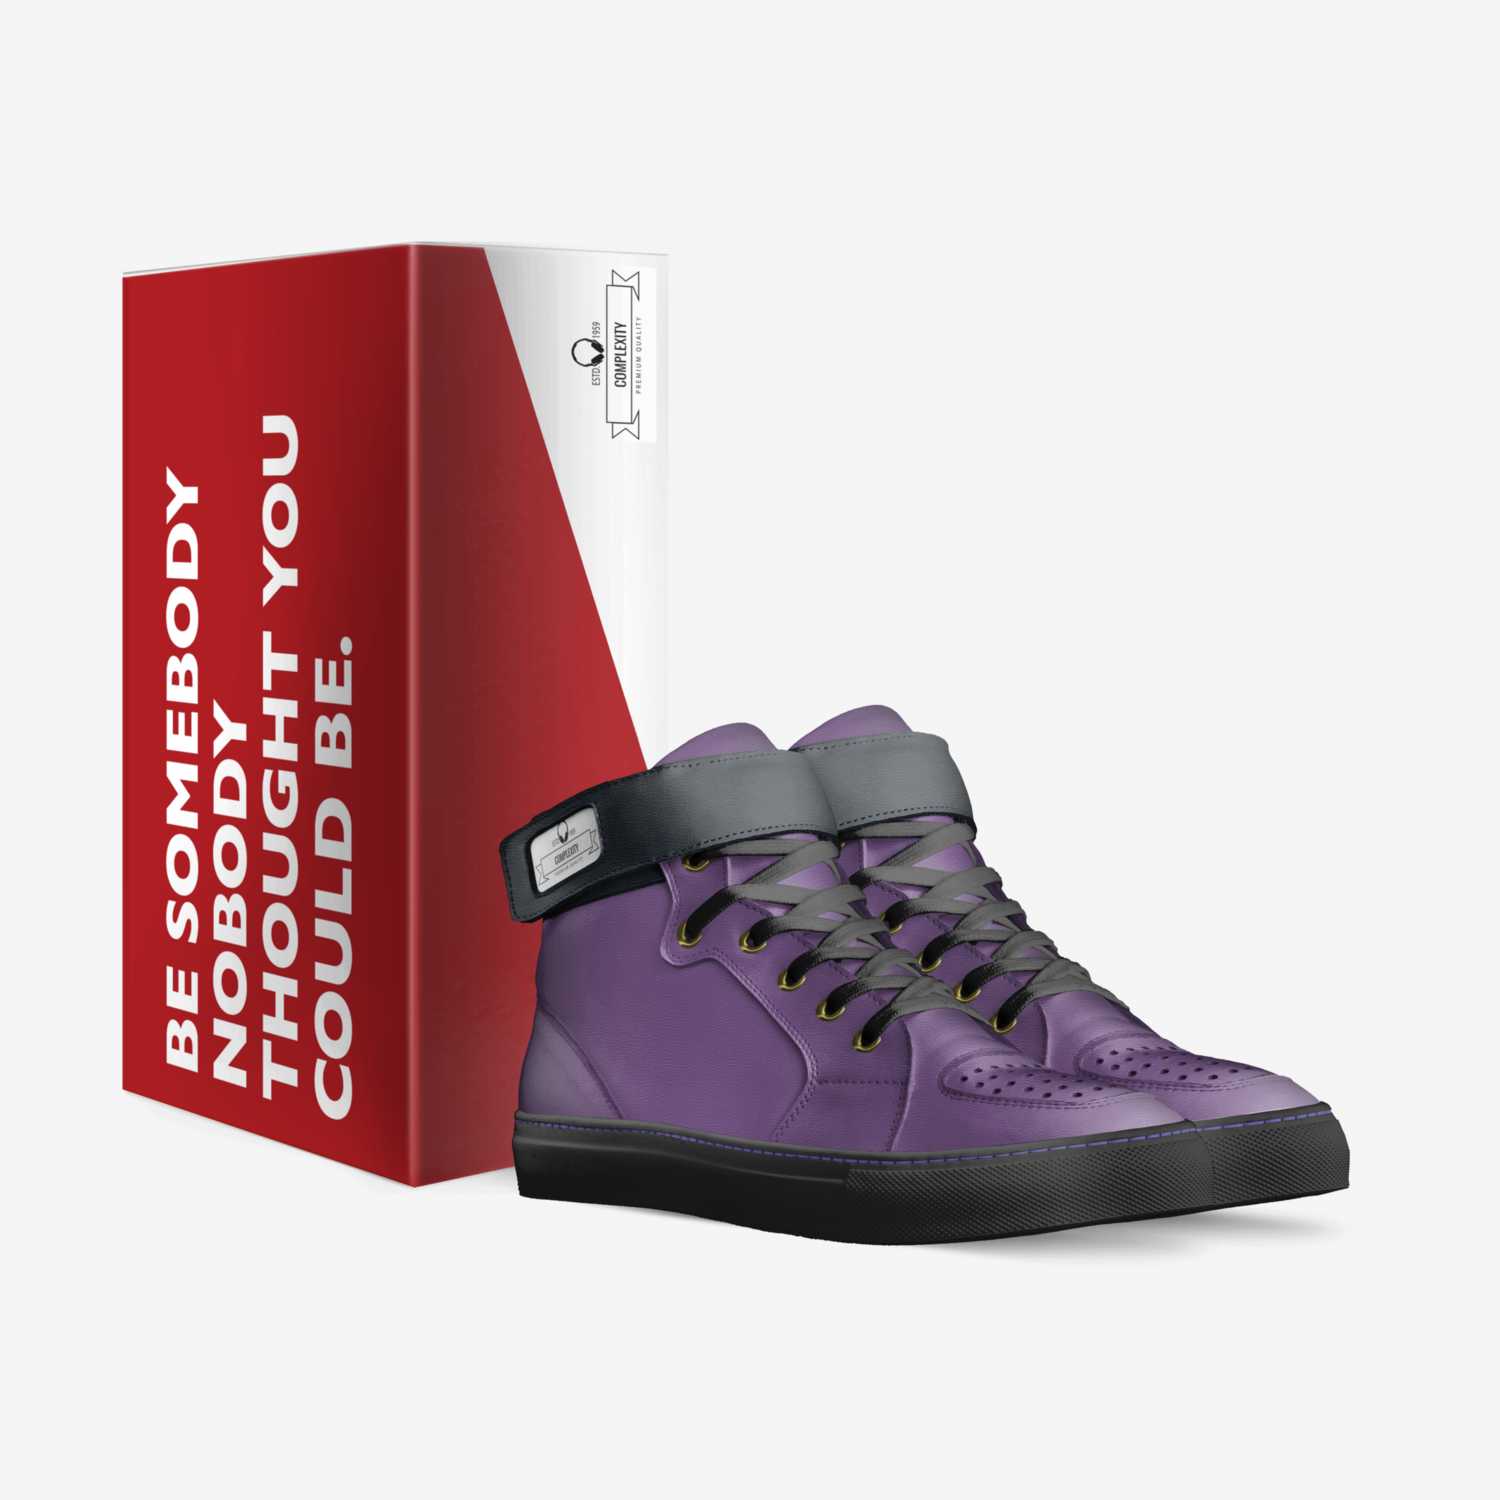 Comlexity custom made in Italy shoes by Caleb Goad | Box view